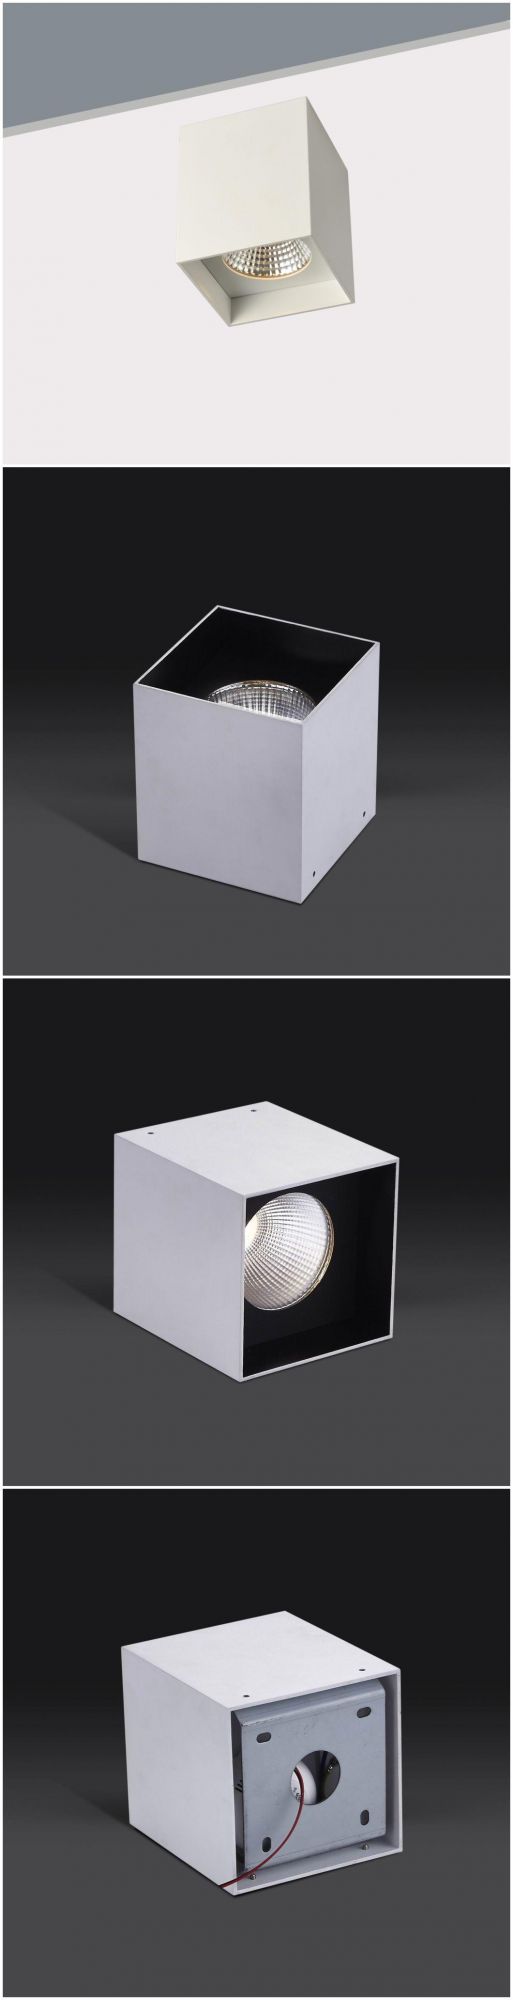 C6024 CE Approval Downlight Mounted Surface Ceiling Light